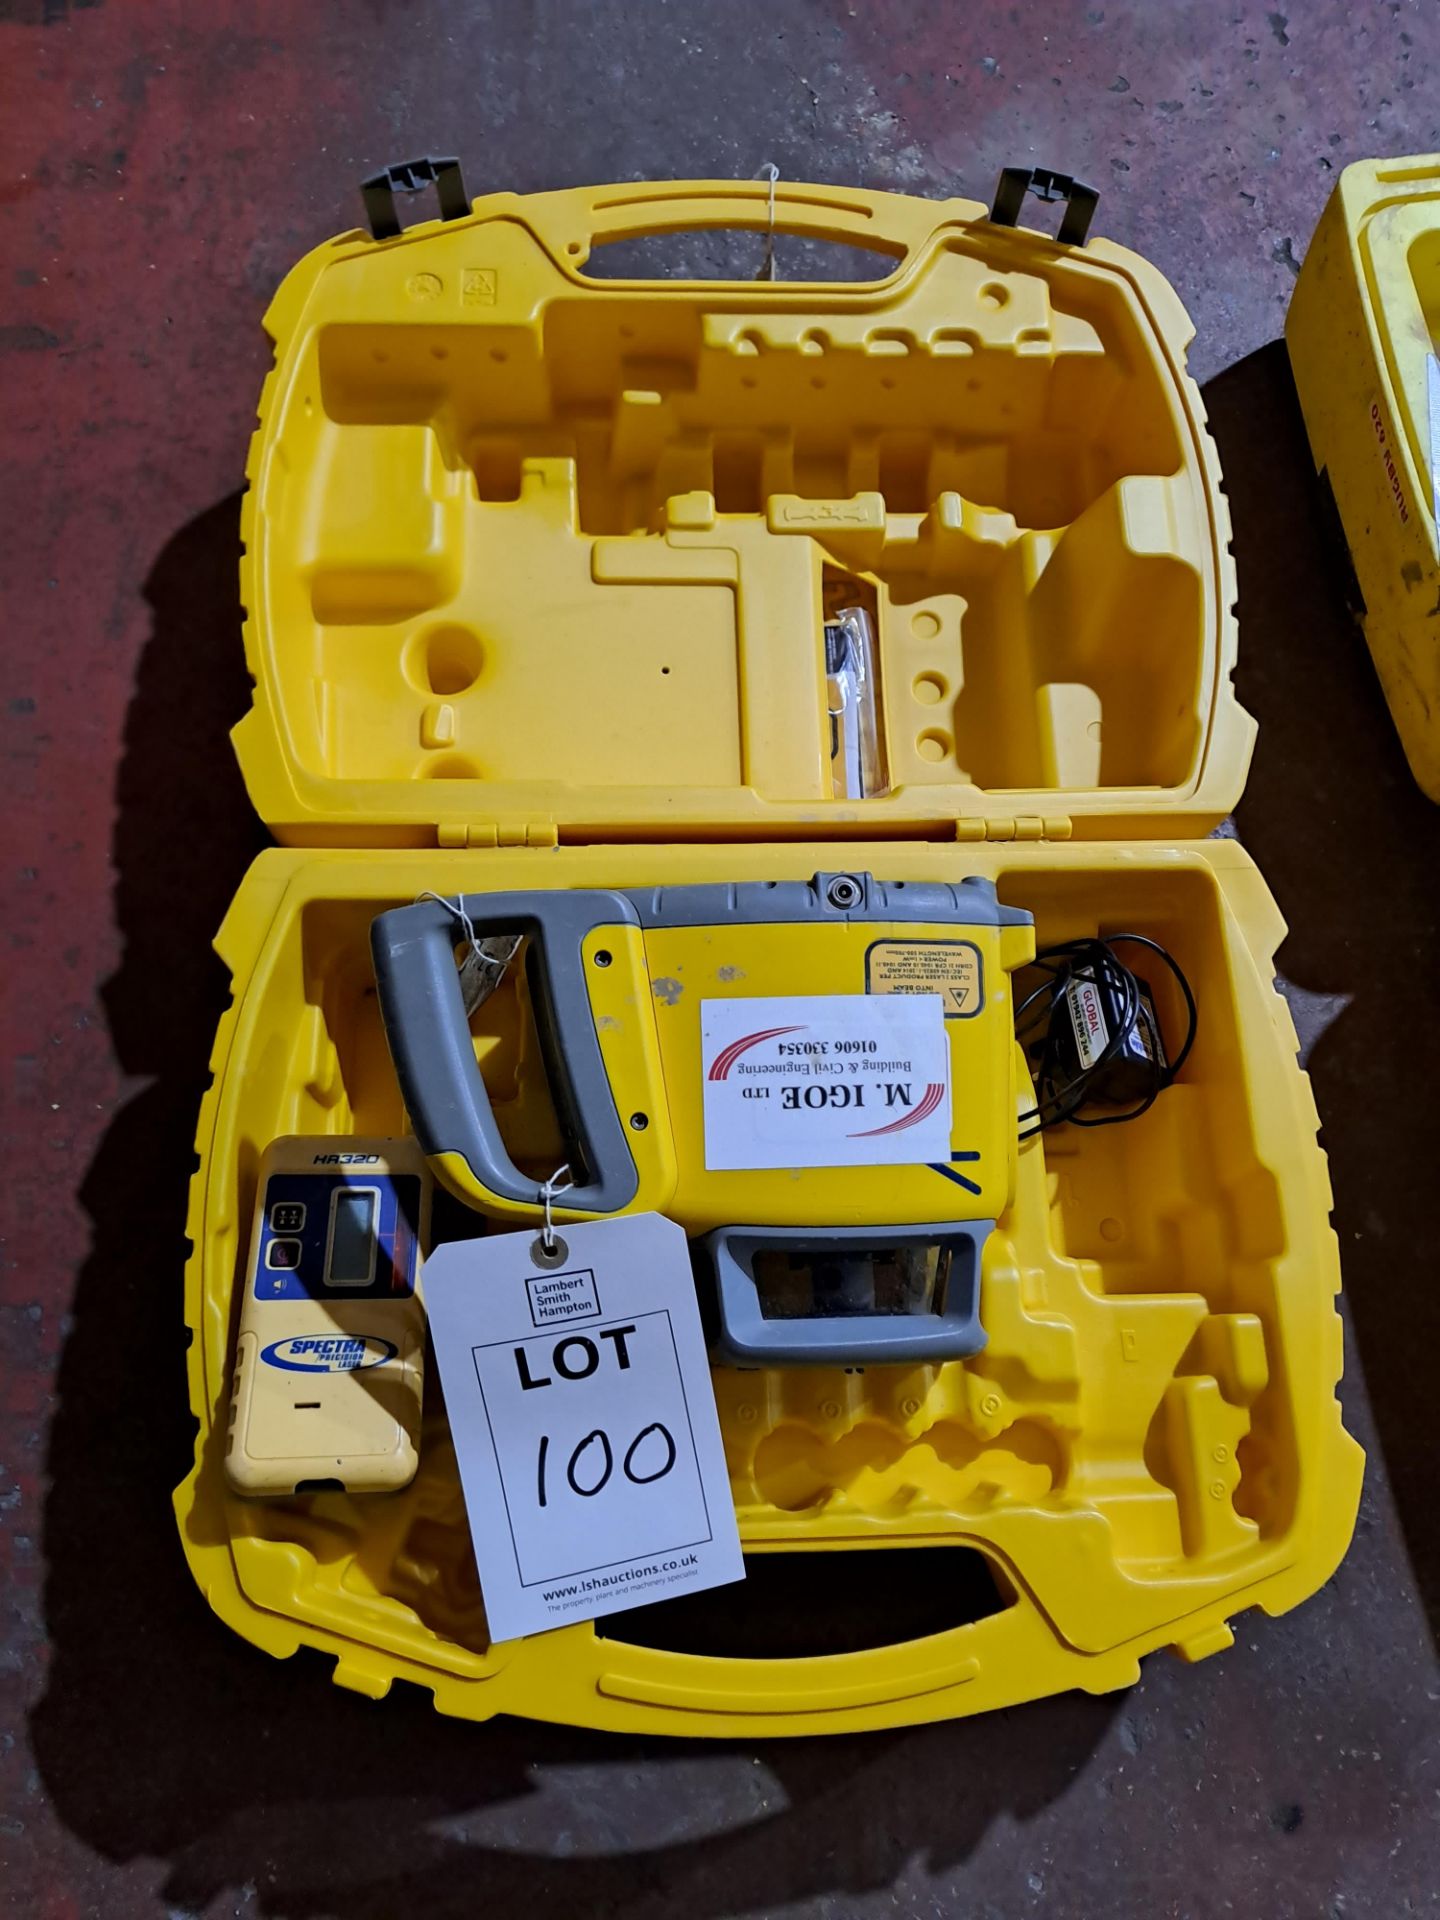 Trimble LL300N Spectra Precision laser level, serial no. 21173427, with Trimble HR320 detector,